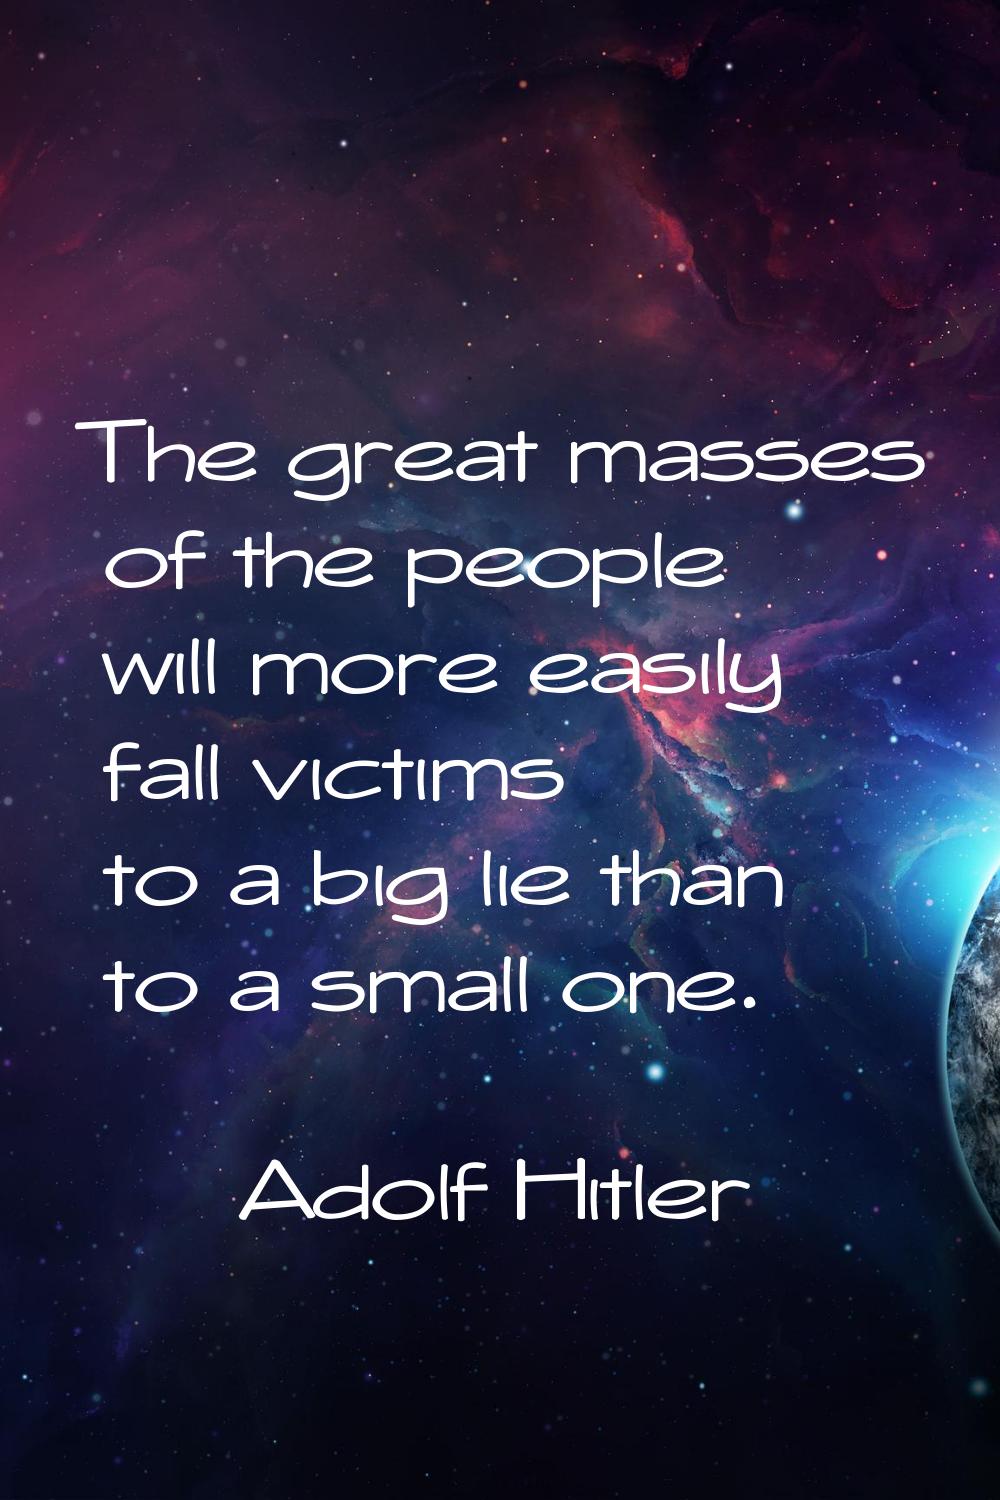 The great masses of the people will more easily fall victims to a big lie than to a small one.